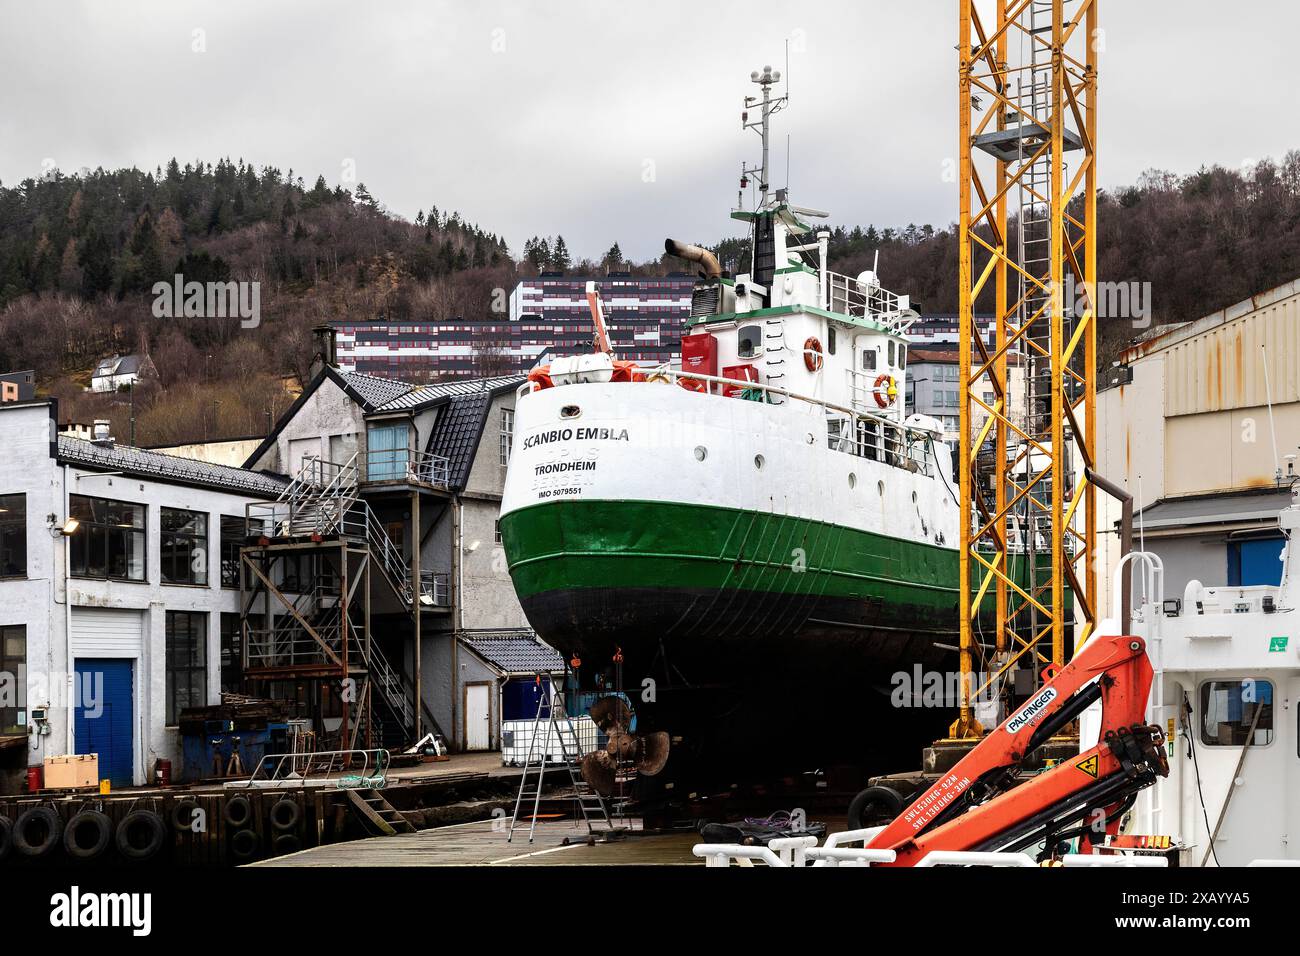 Old vessel, Scanbio Embla (b.1961), rebuilt as a wellboat -  at Endur shipyard at Laksevaag, in the port of Bergen, Norway. Stock Photo